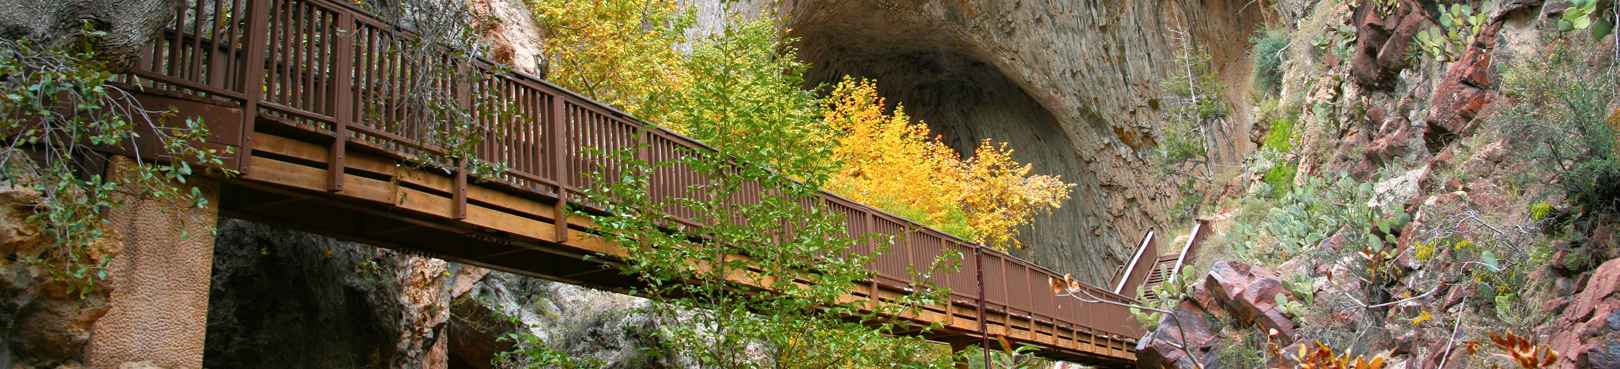 A view from the bottom of Pine Canyon looking up at the new foot bridge surrounded by autumn colors above.